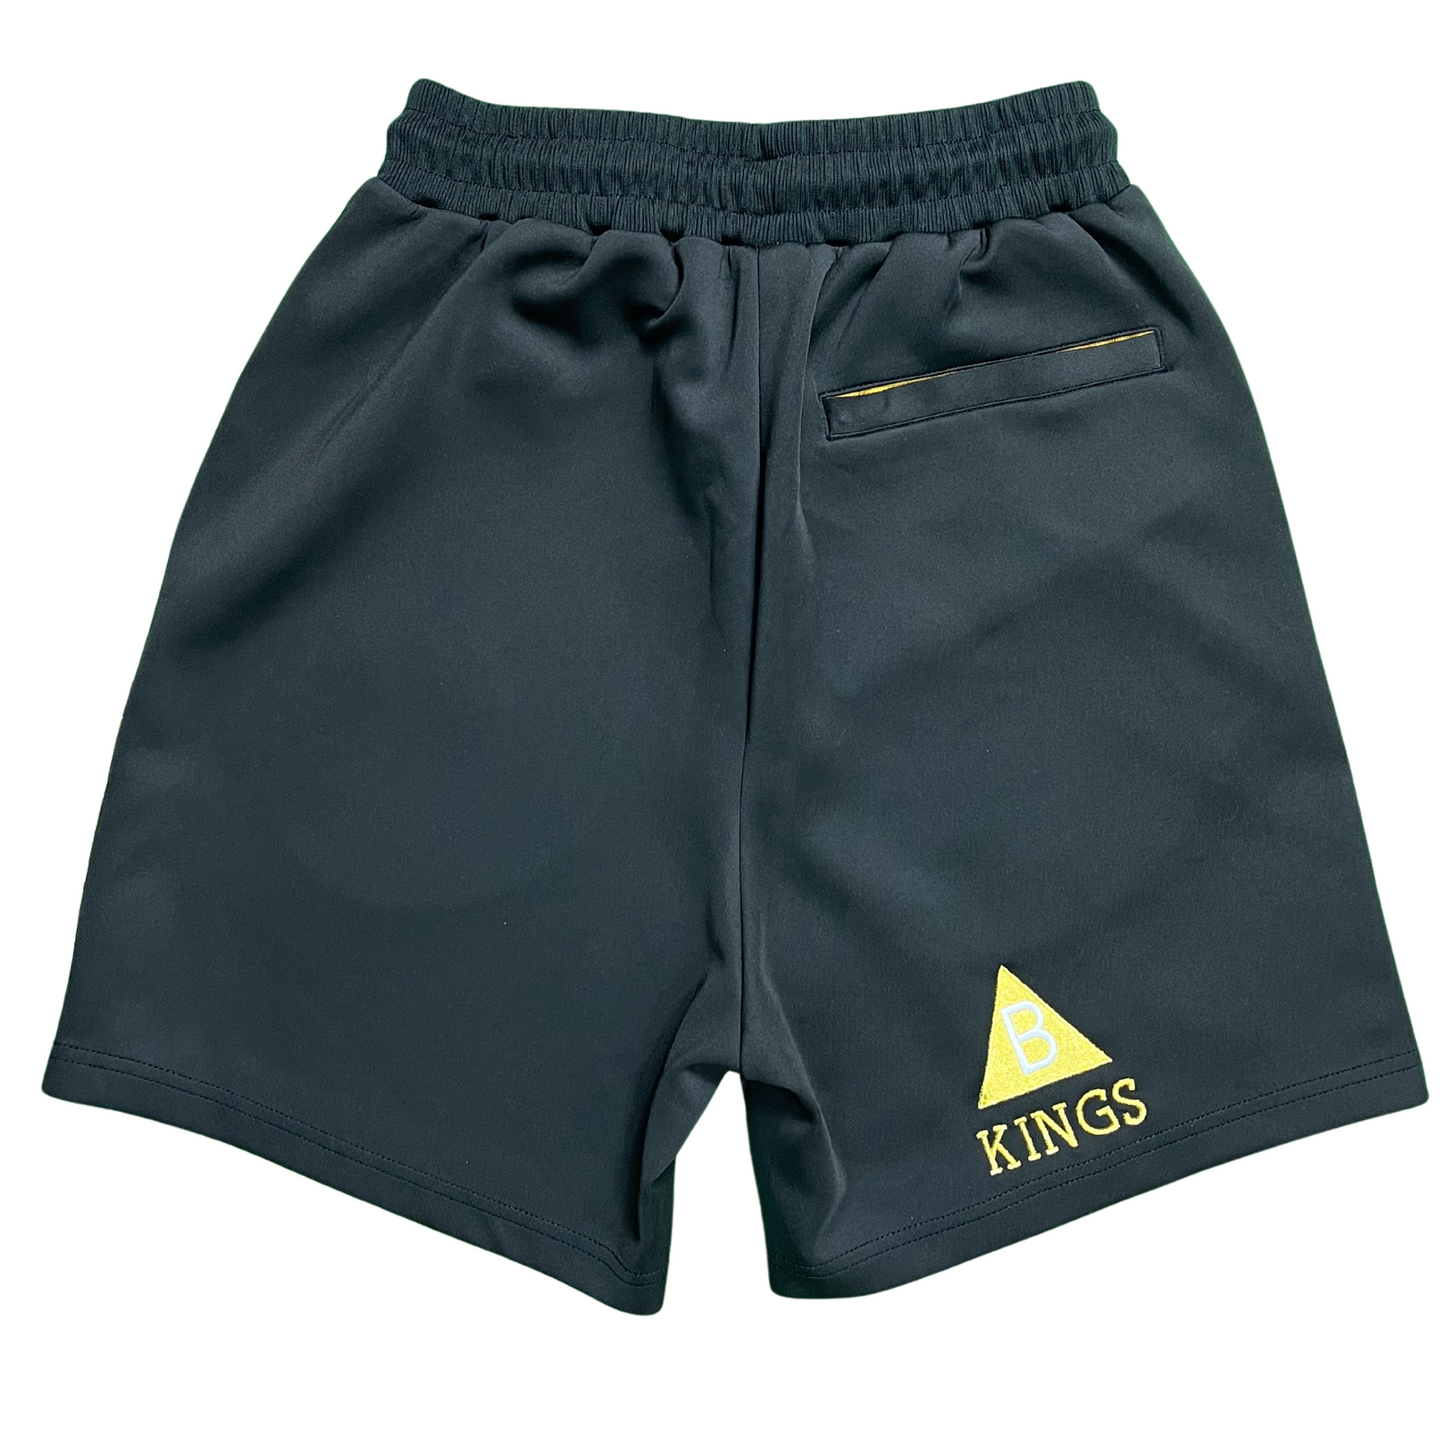 Heart of a King Shorts